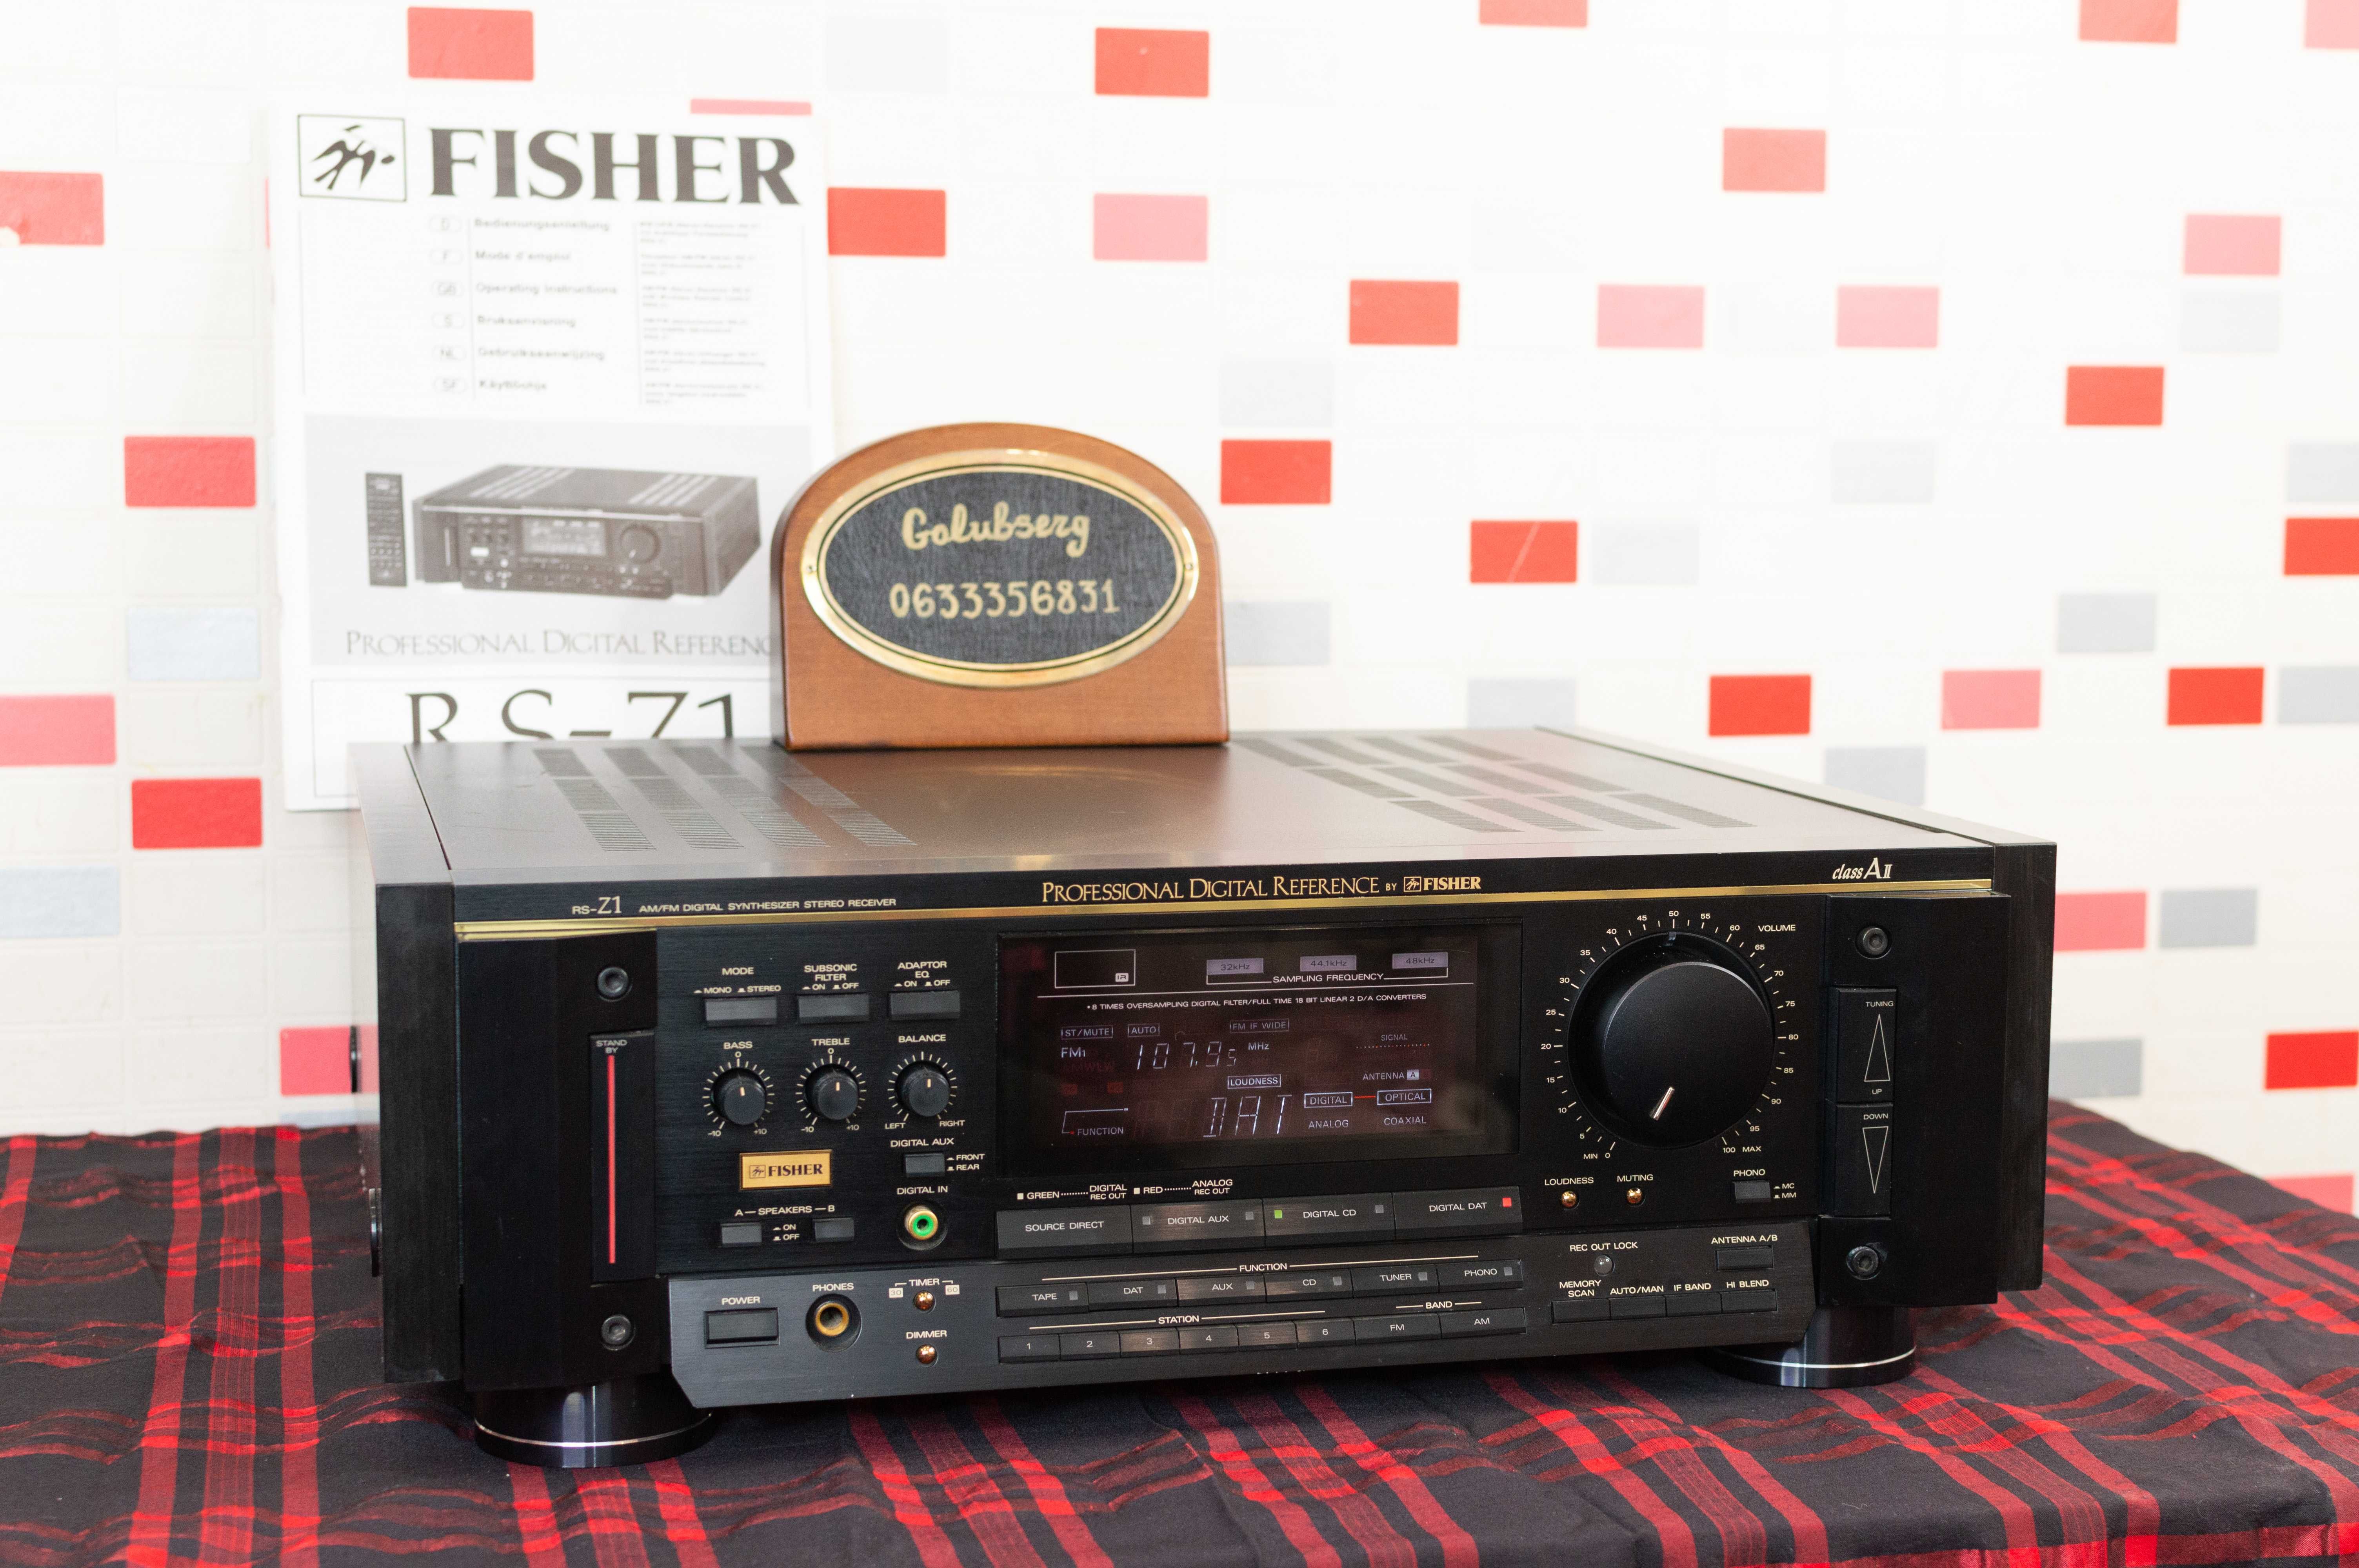 Fisher RS-Z1 Professional Digital Reference! ЦАП/DAC! Hi-End!